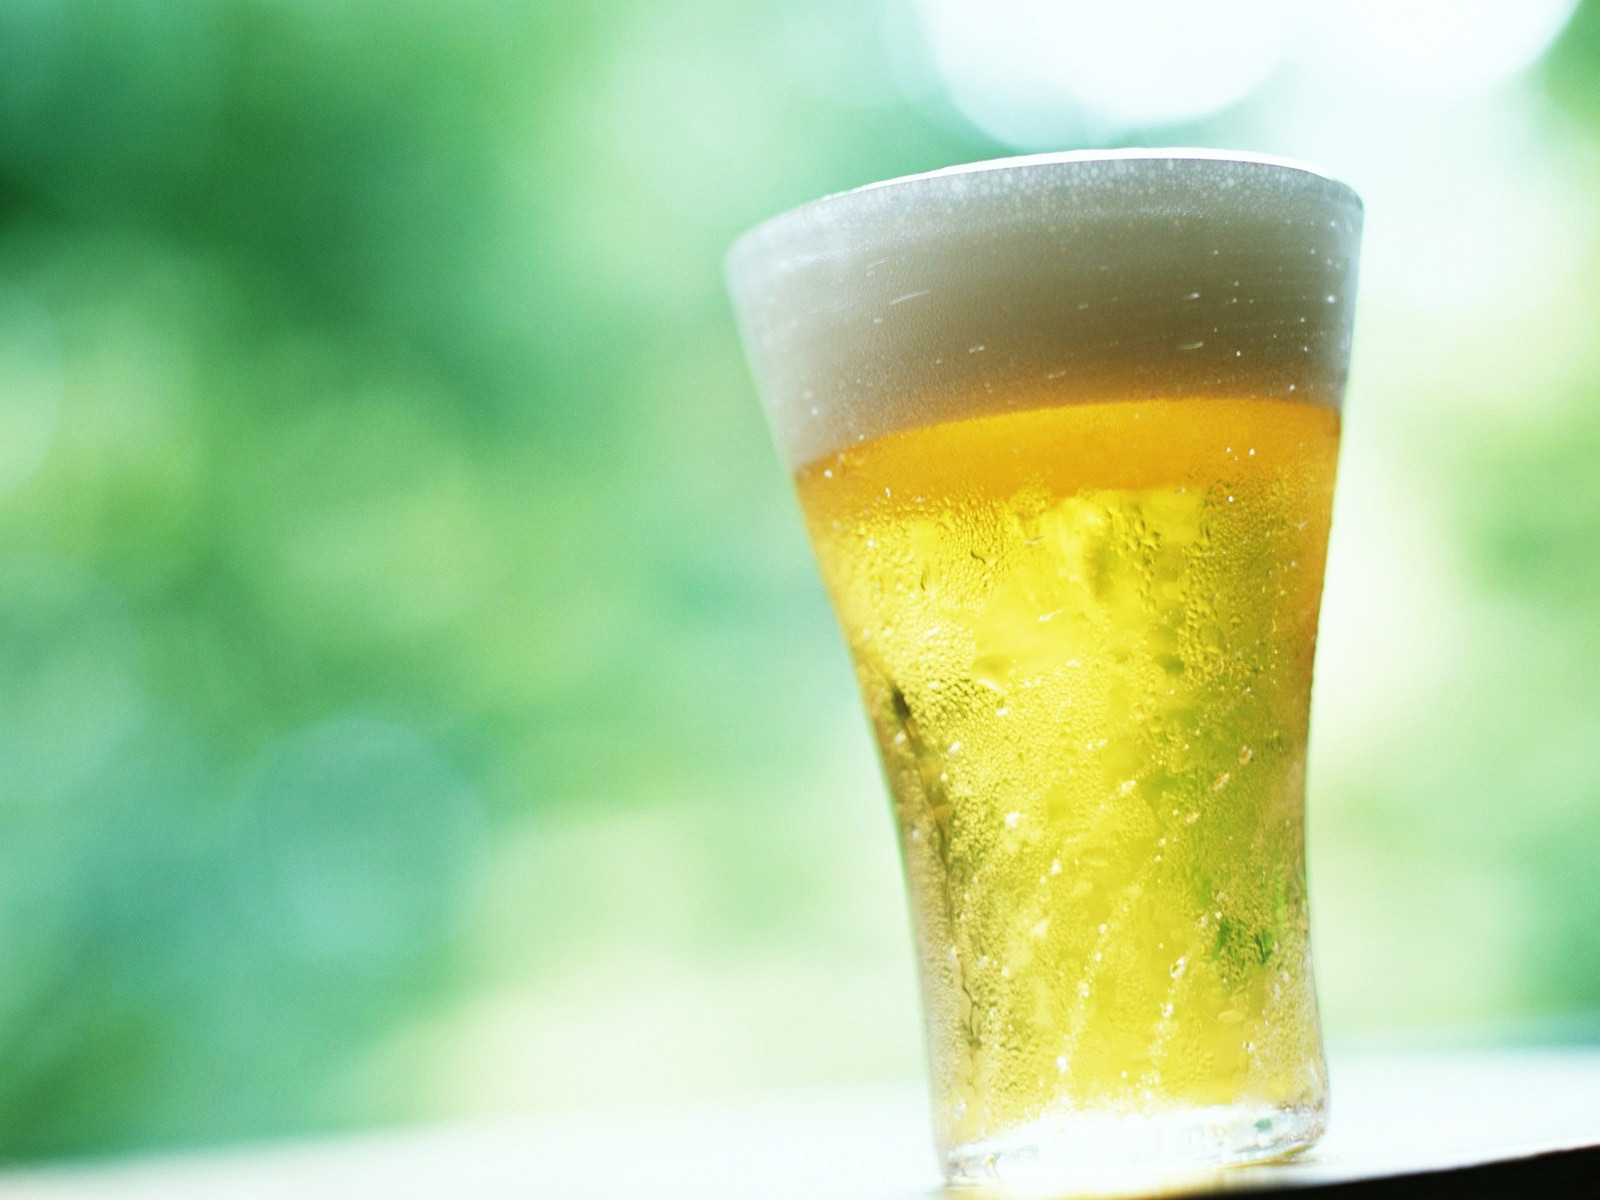 Cold Glass of Beer hd wallpaper for 1600 x 1200 resolution